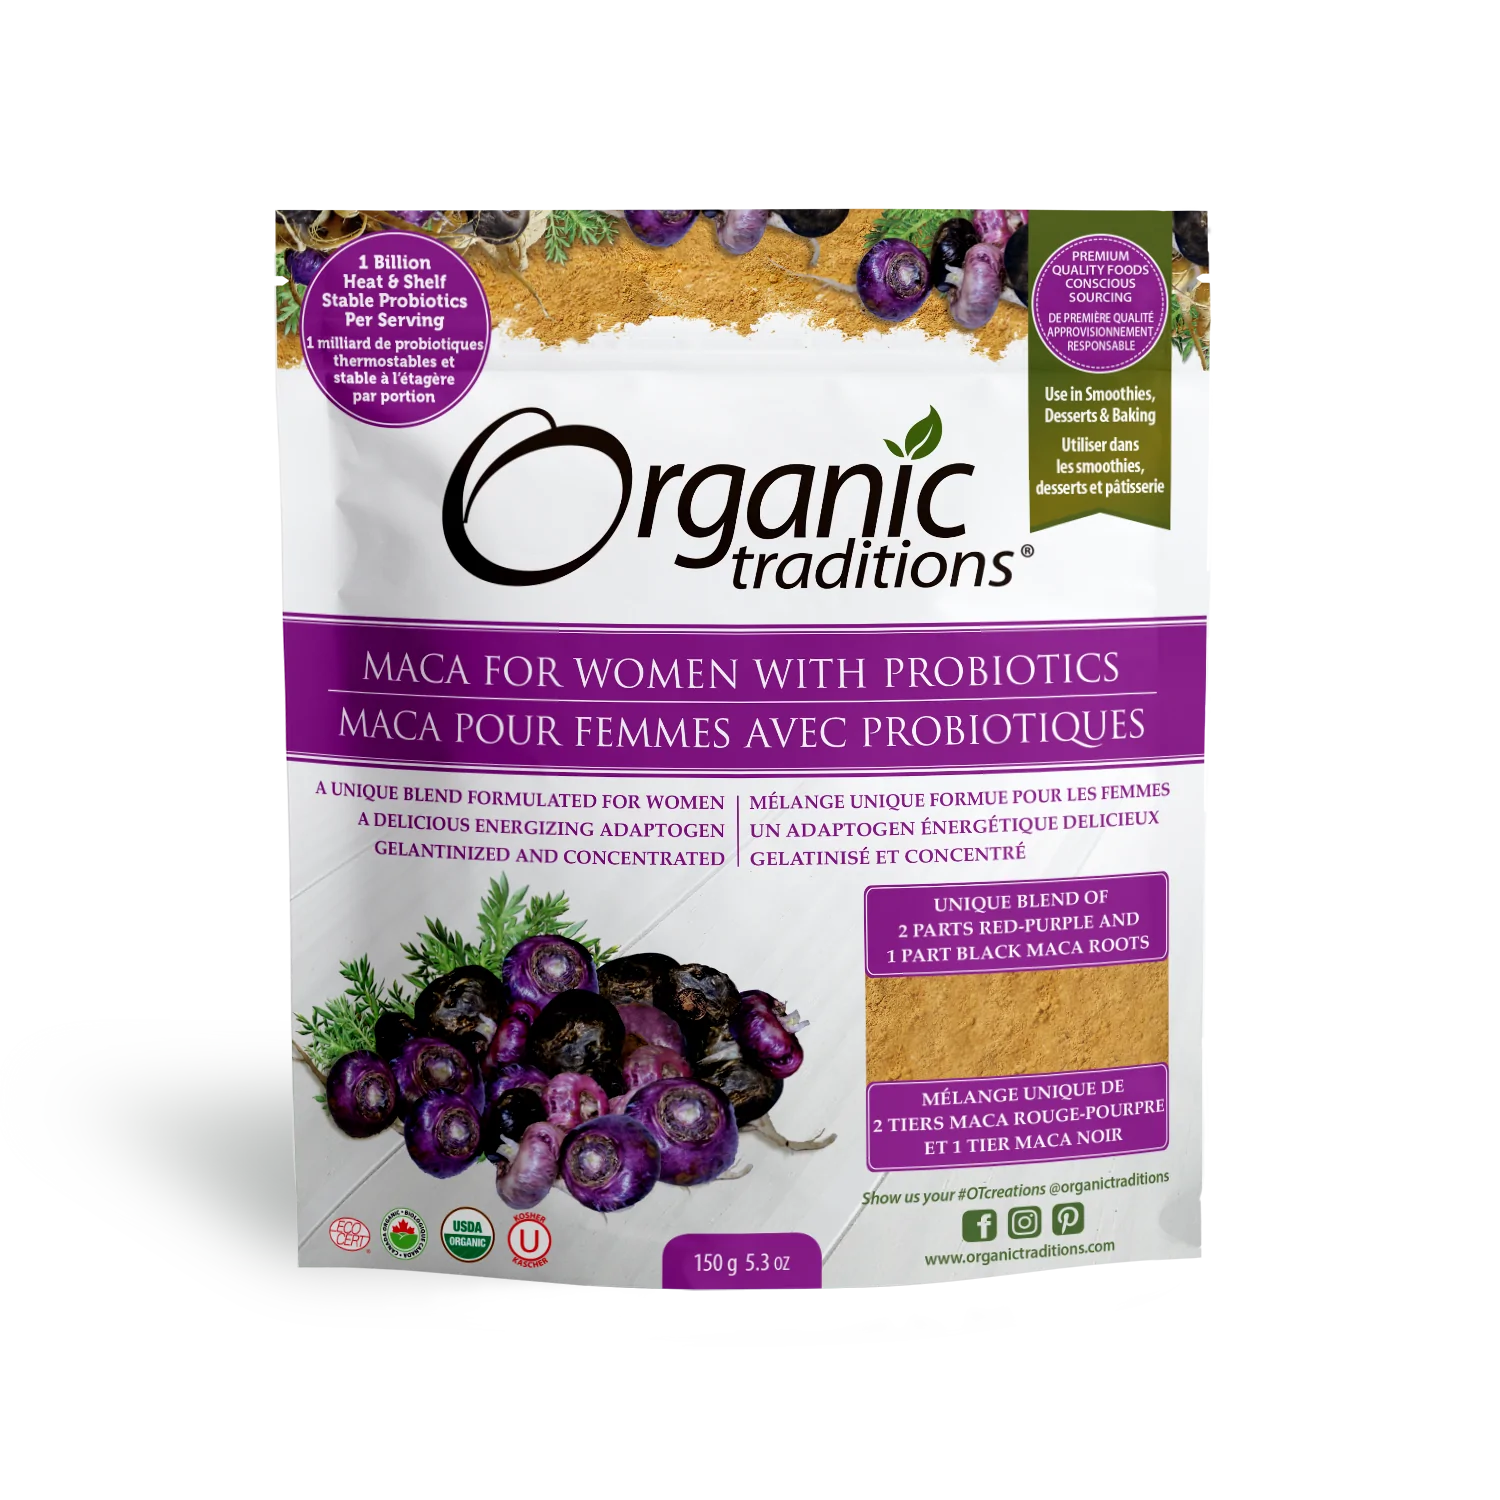 Organic Traditions - Maca for Women with Probiotics - 150g